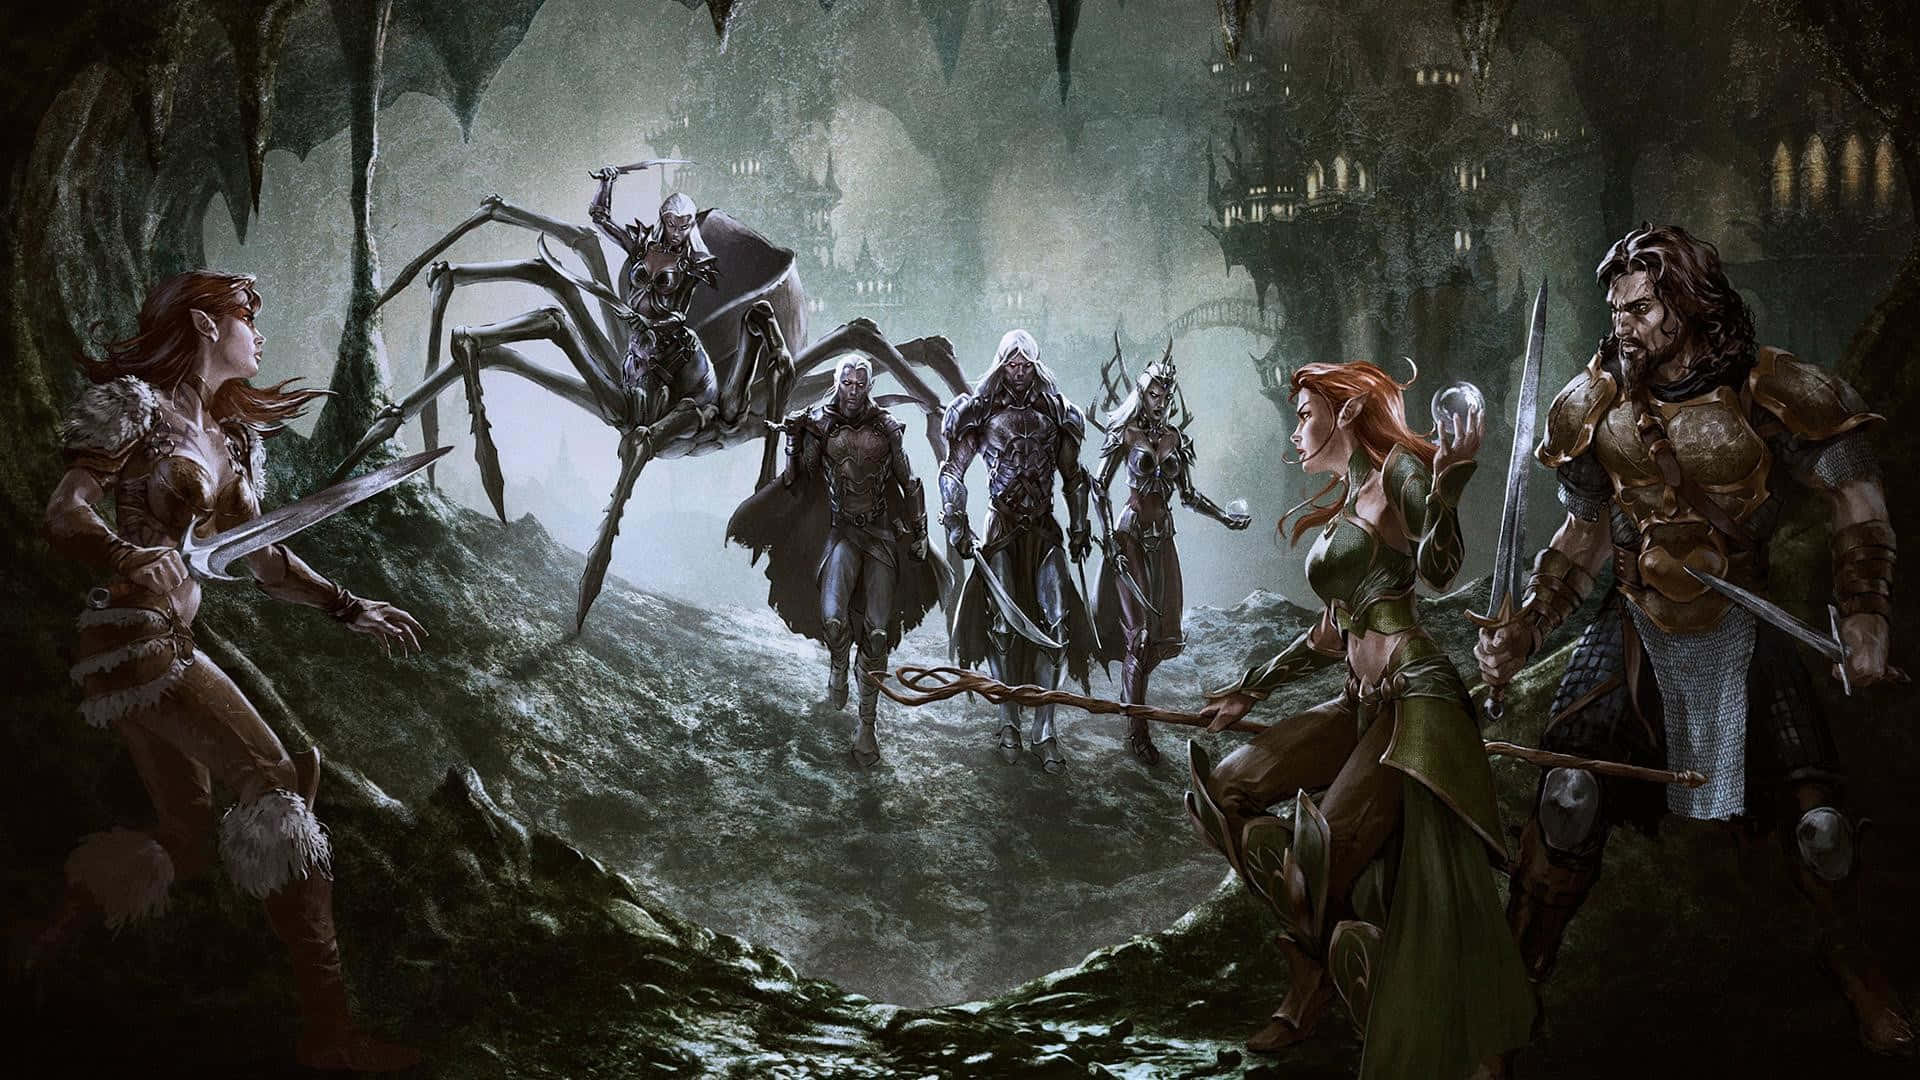 Adventure Through Dungeons and Dragons